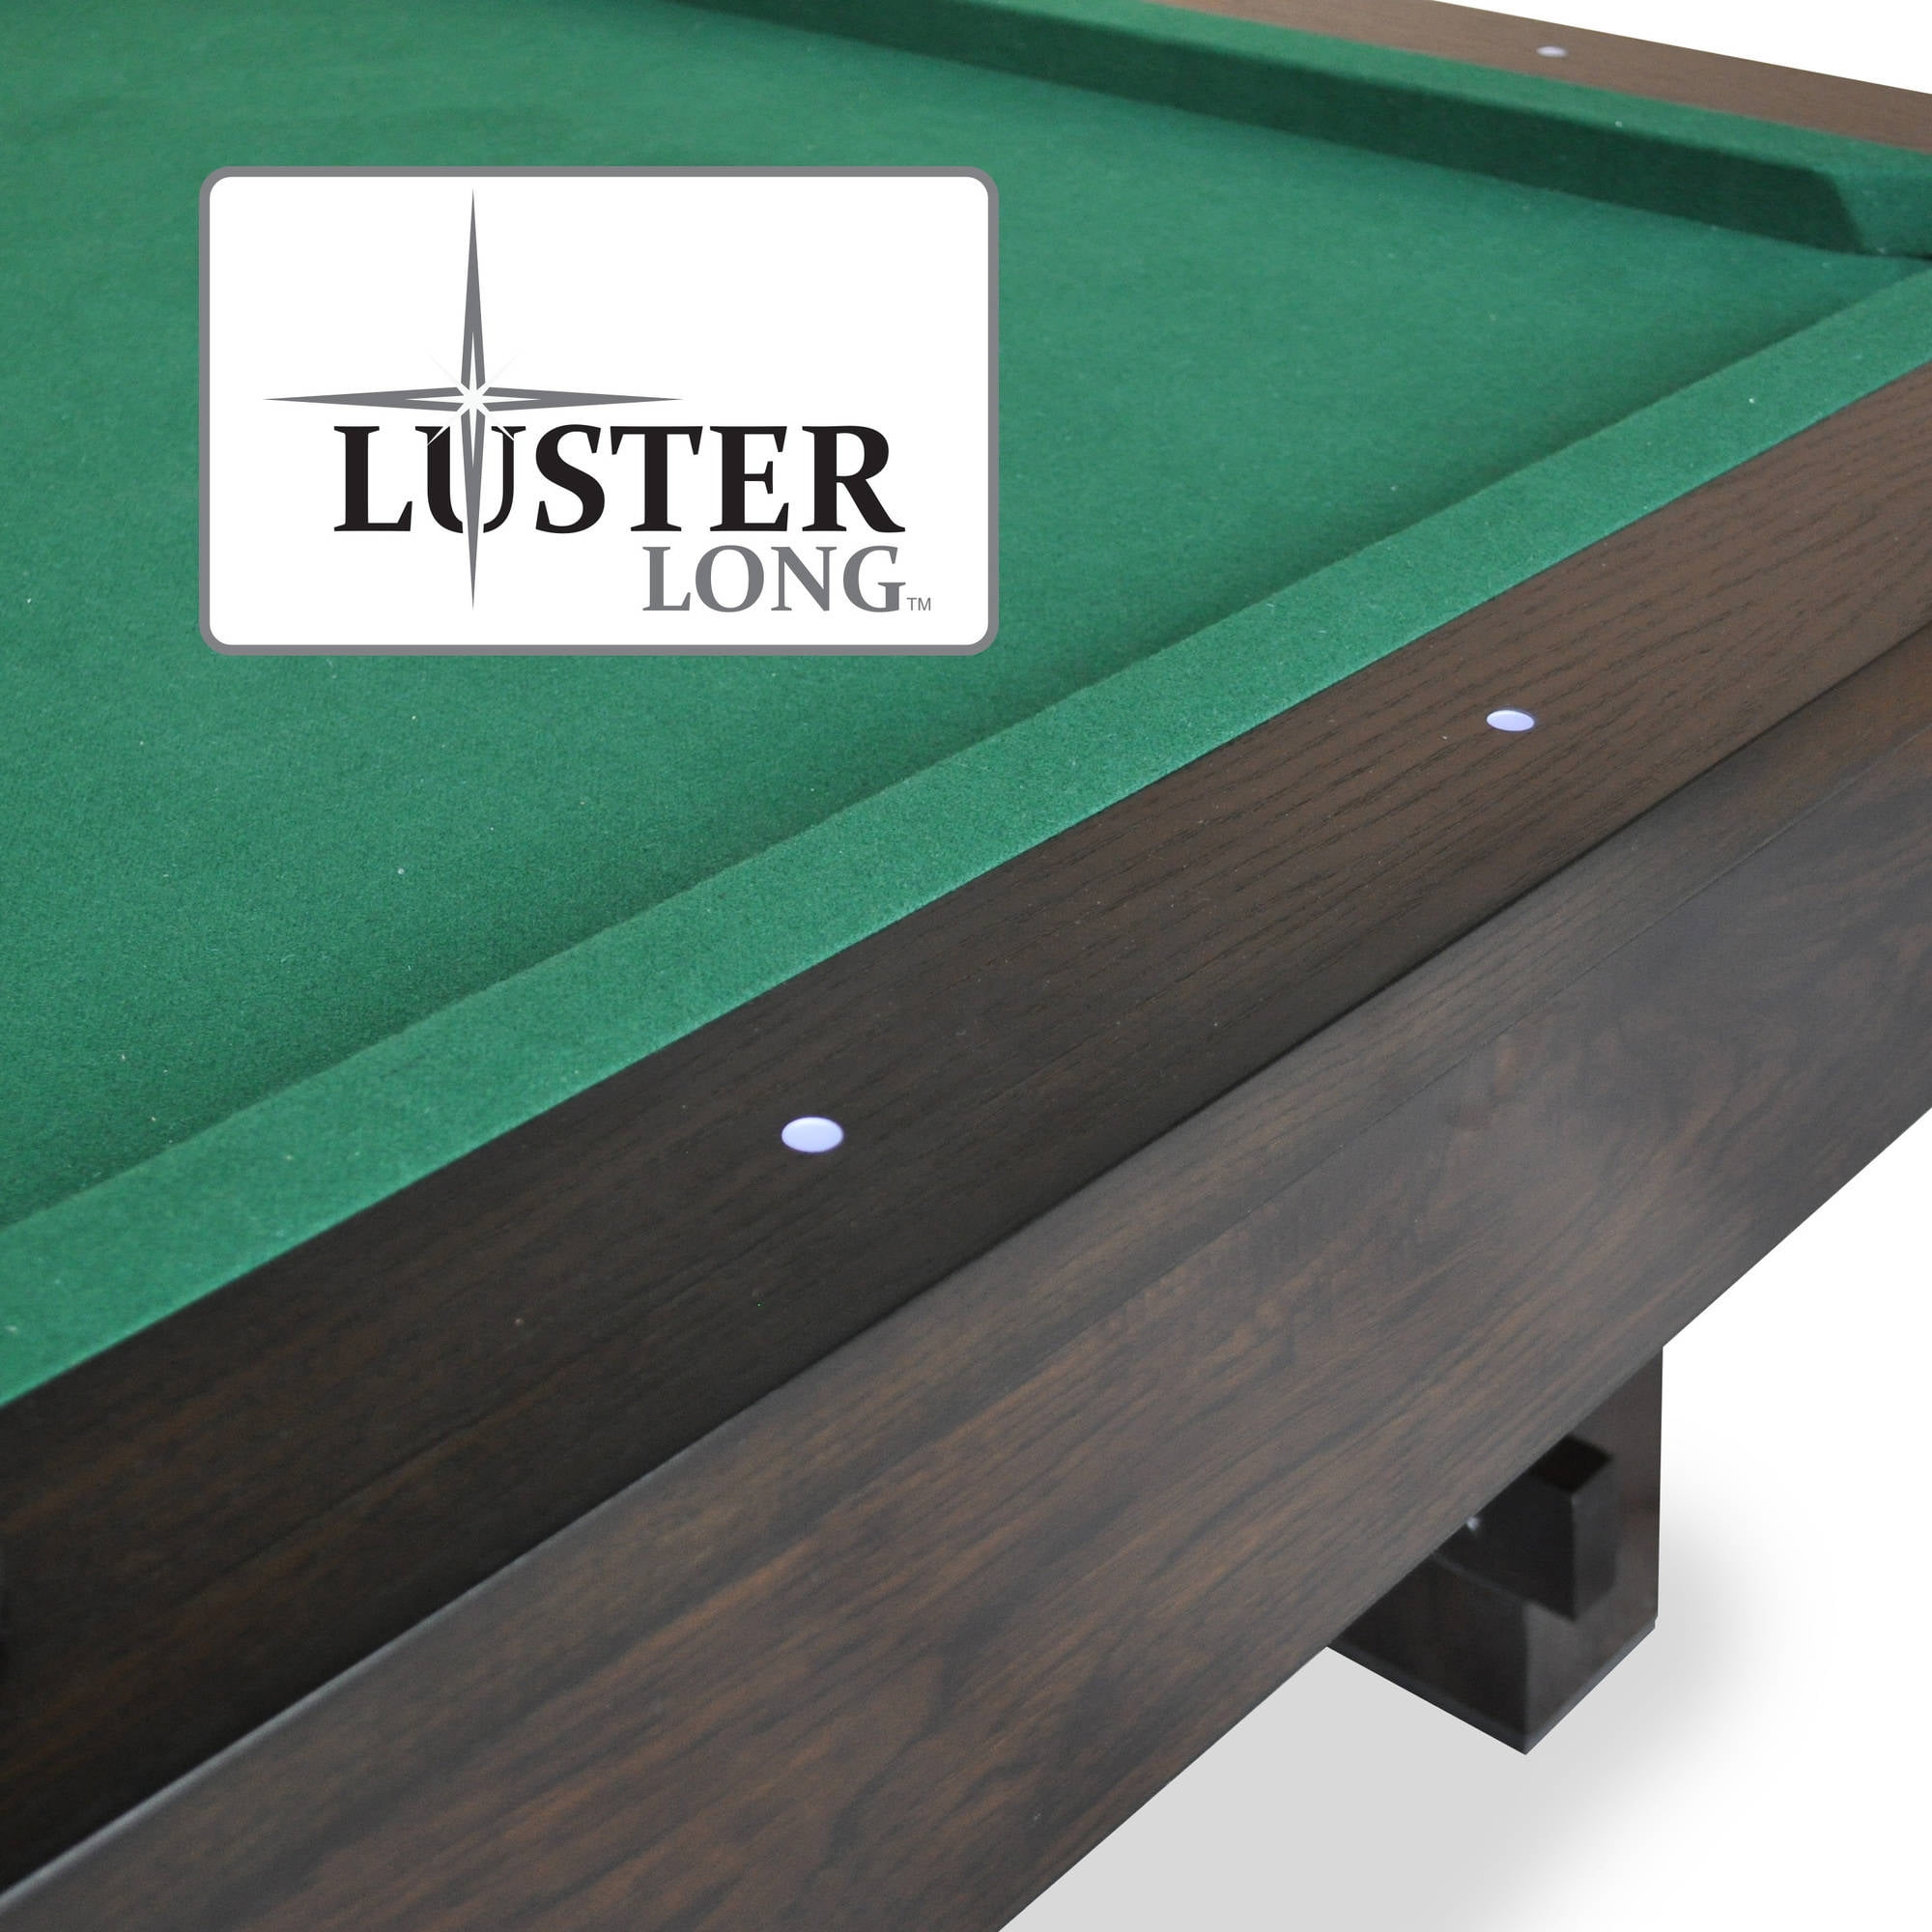  EastPoint Sports Masterton Green Billiard Table - Bar-Size Pool  Table 87 Inch – Perfect Indoor Game Billiards Table for Family Game Room :  Sports & Outdoors